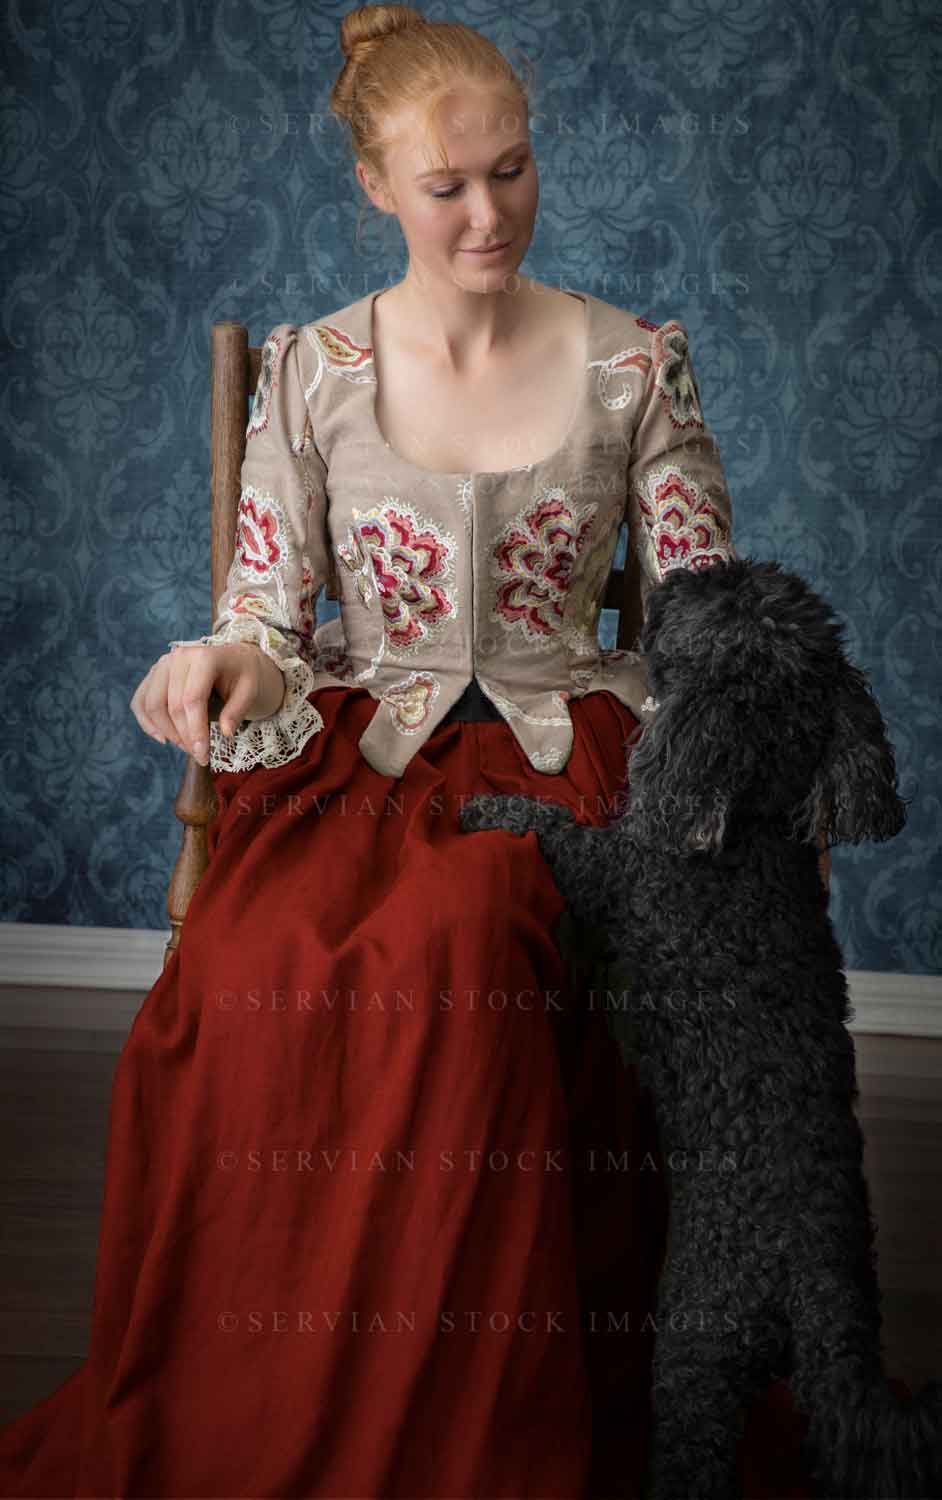 Renaissance or Georgian woman in an embroidered bodice and red skirt patting a black poodle (Lauren 7305)